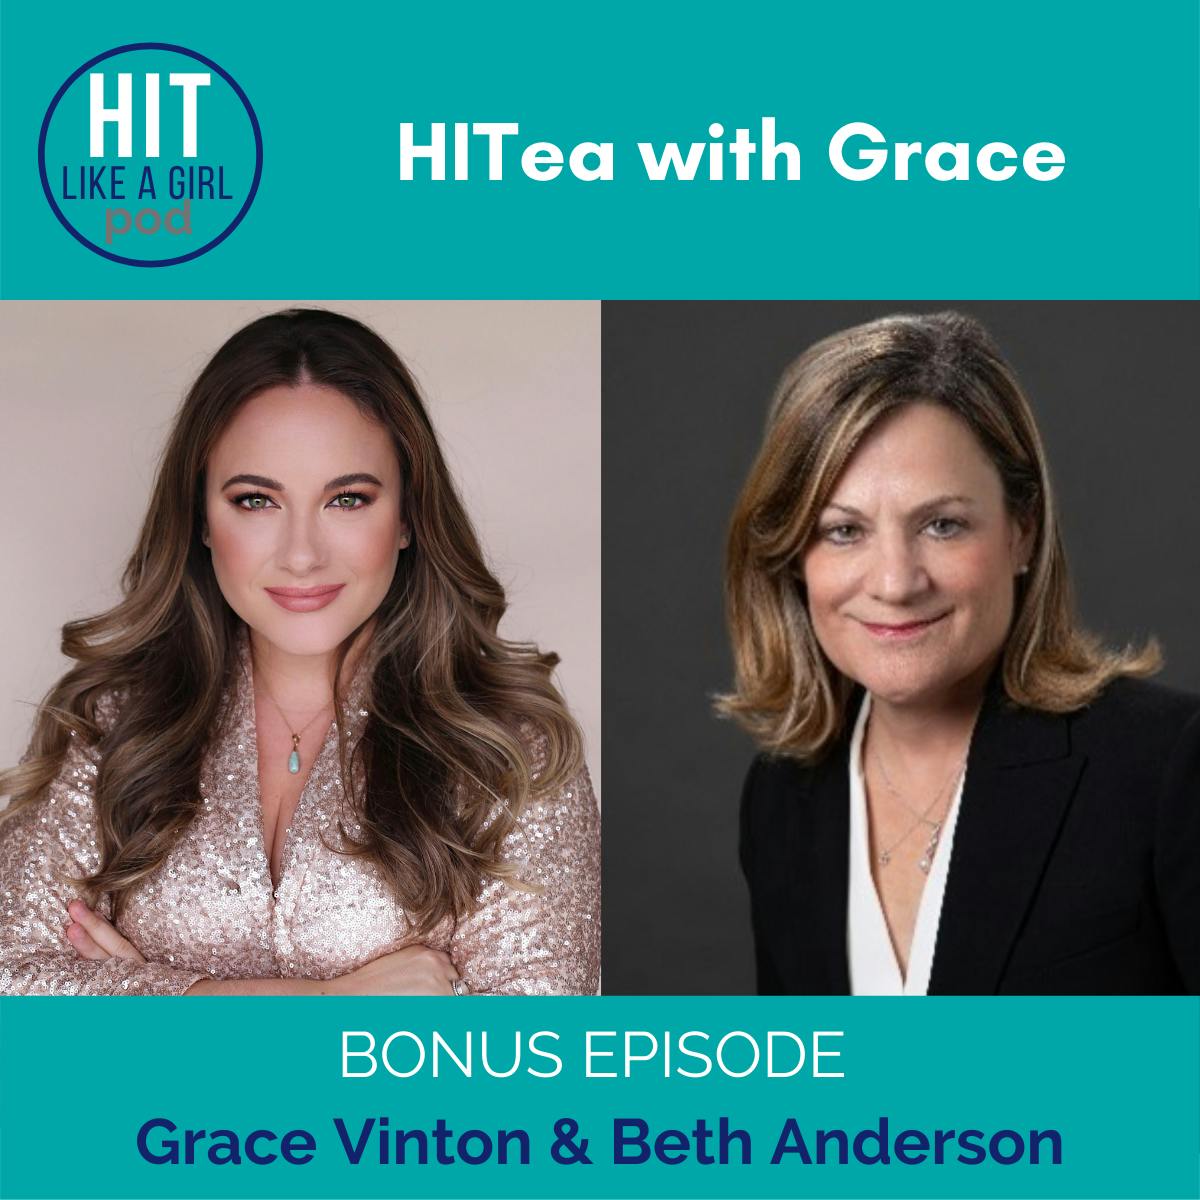 HITea with Grace: Beth Andersen on Anthem's Continued Journey Toward Value-Based Care